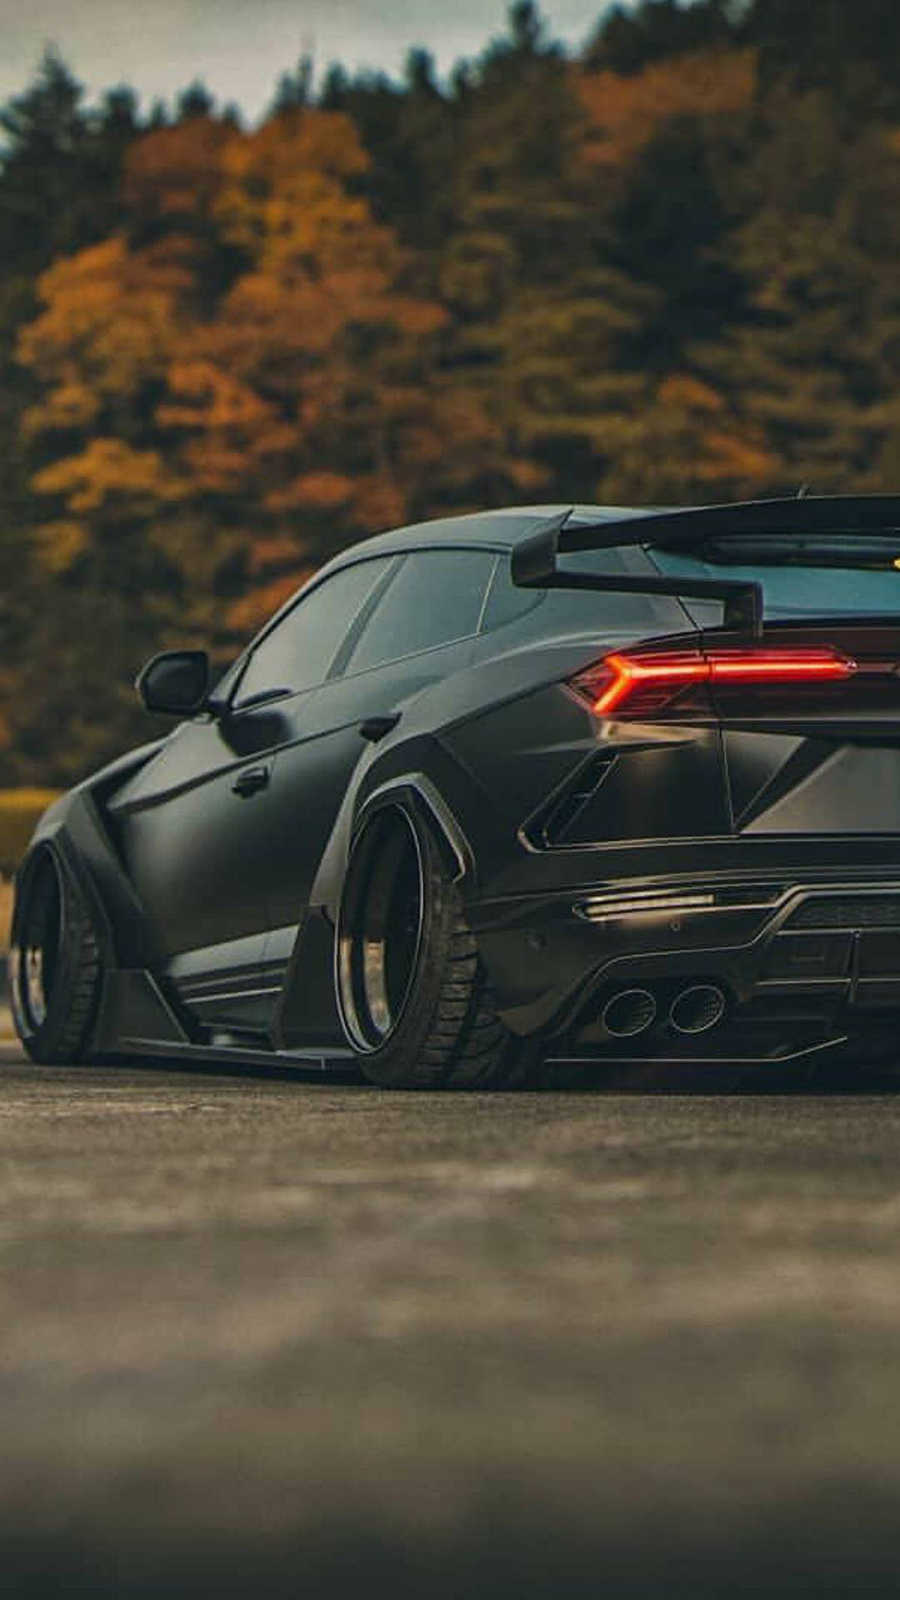 Stealthy_Beast Audi Super Cars hd wallpapers